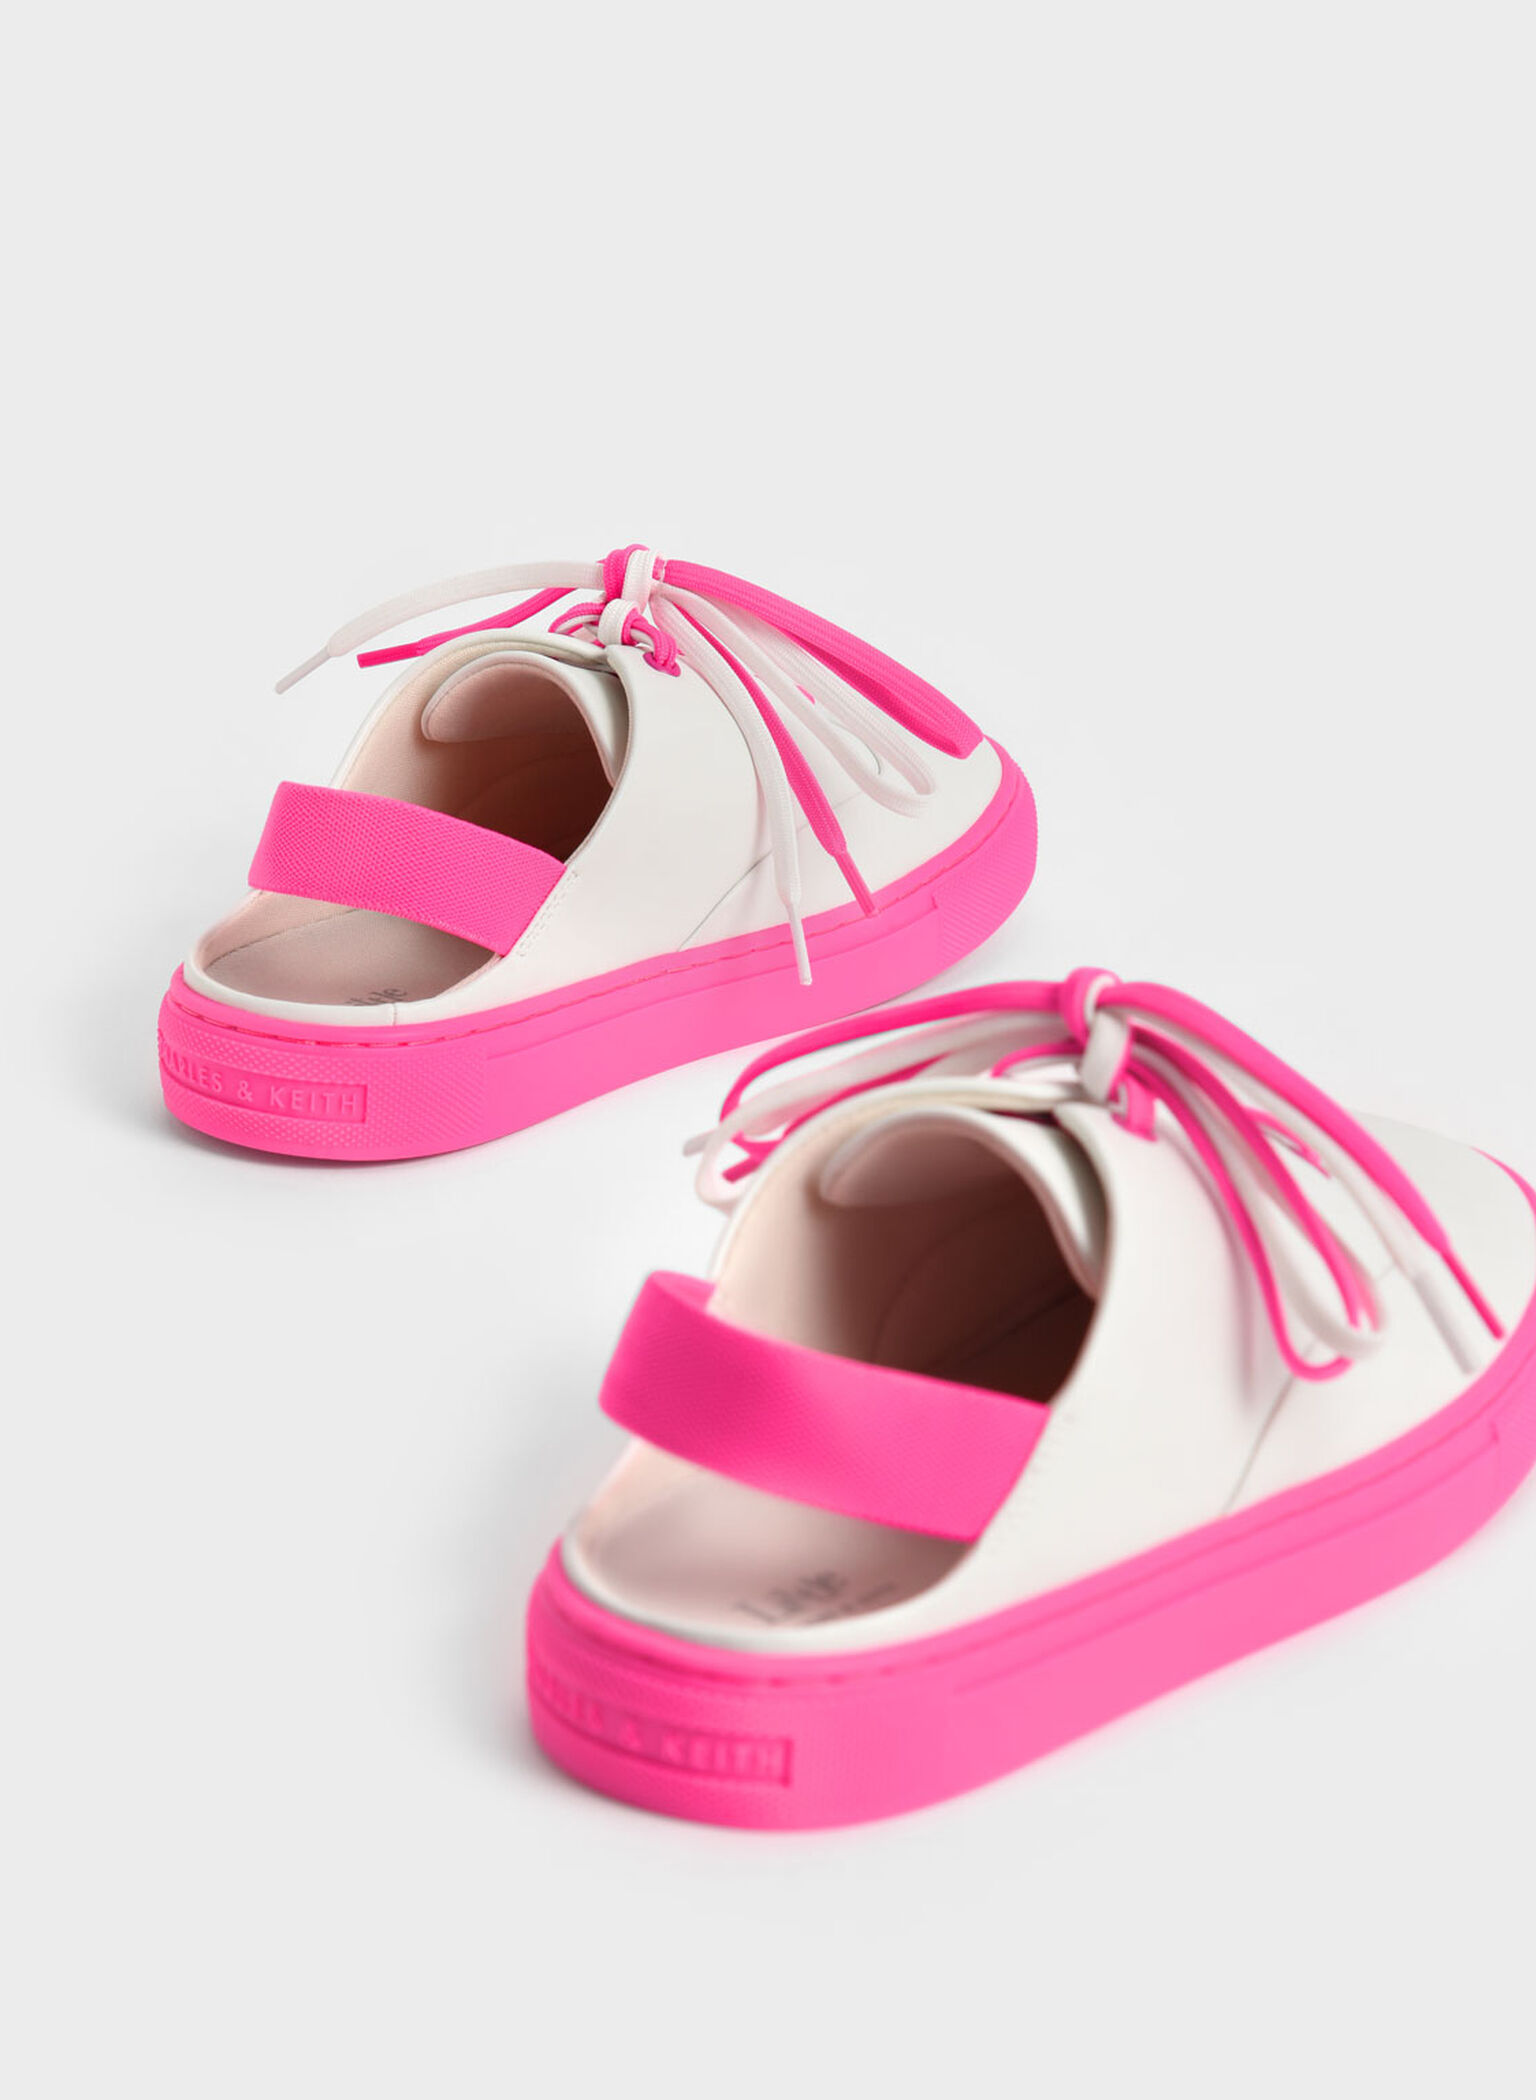 Girls' Two-Tone Lace-Up Sneaker Mules, Fuchsia, hi-res